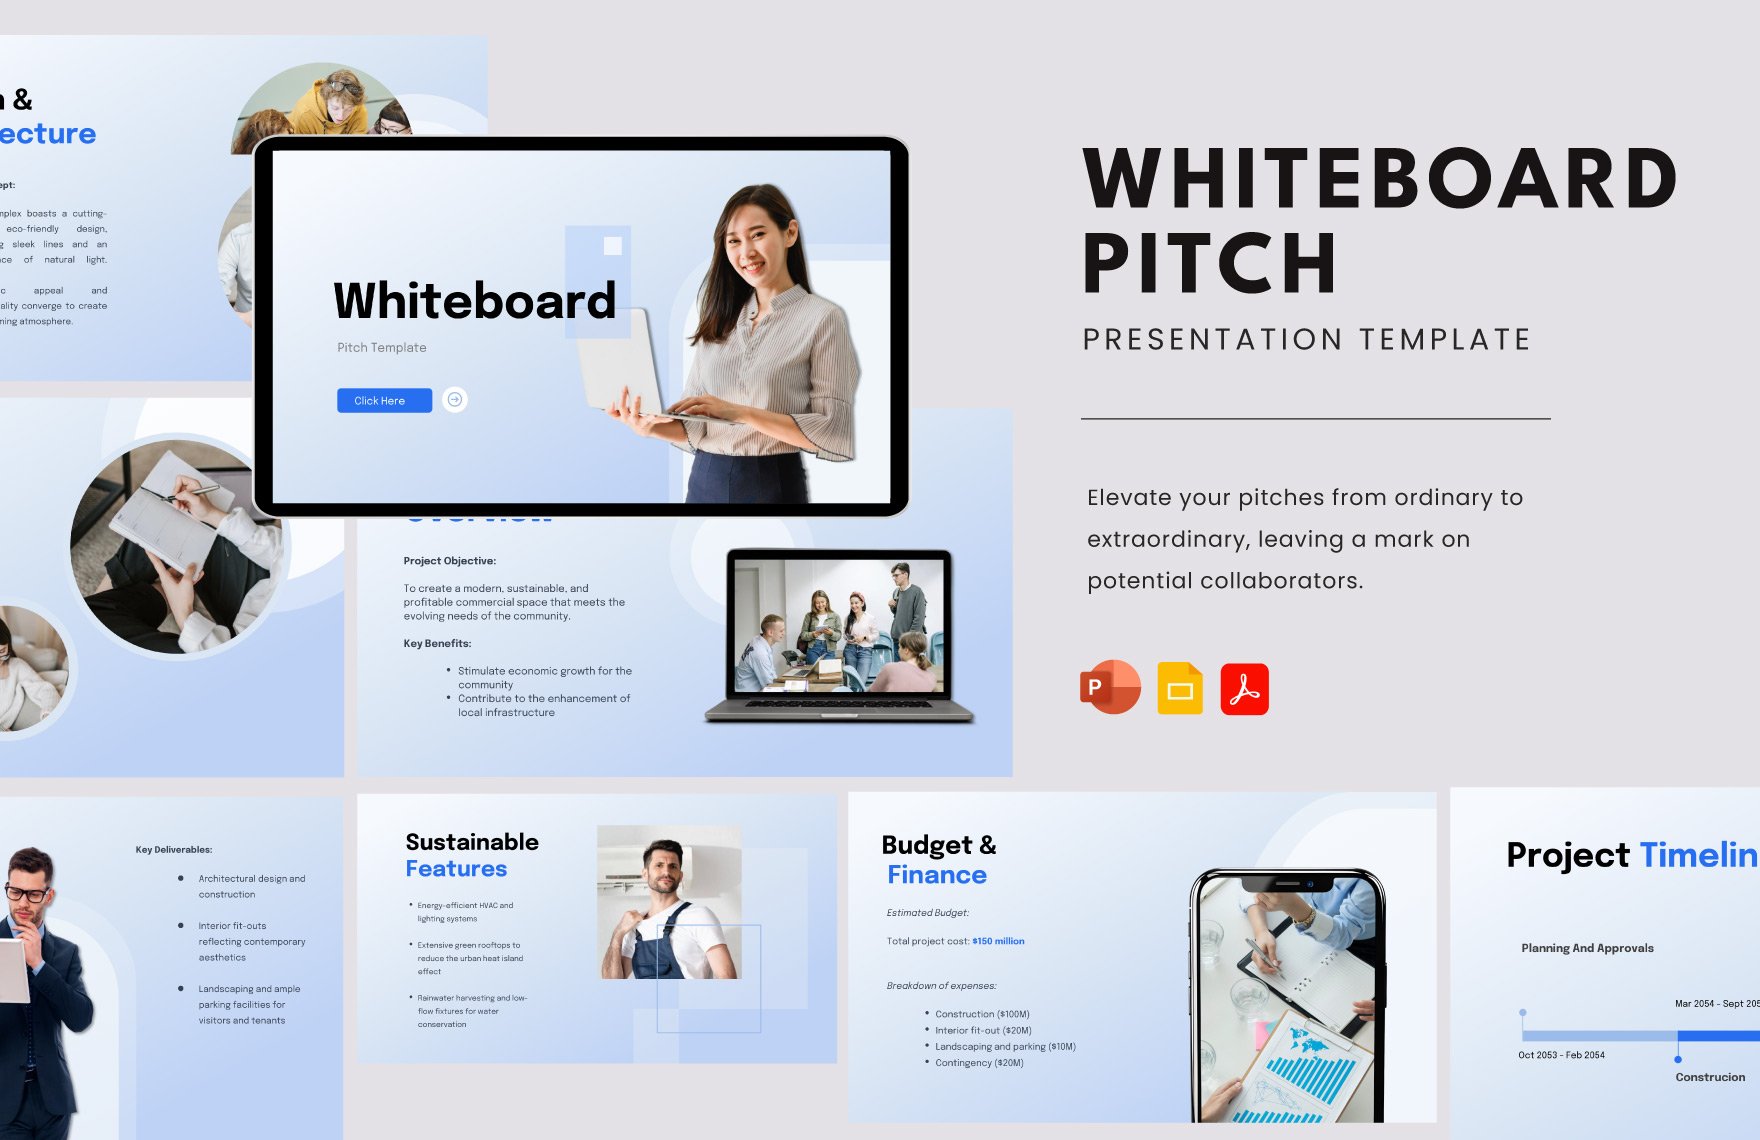 Whiteboard Pitch Template